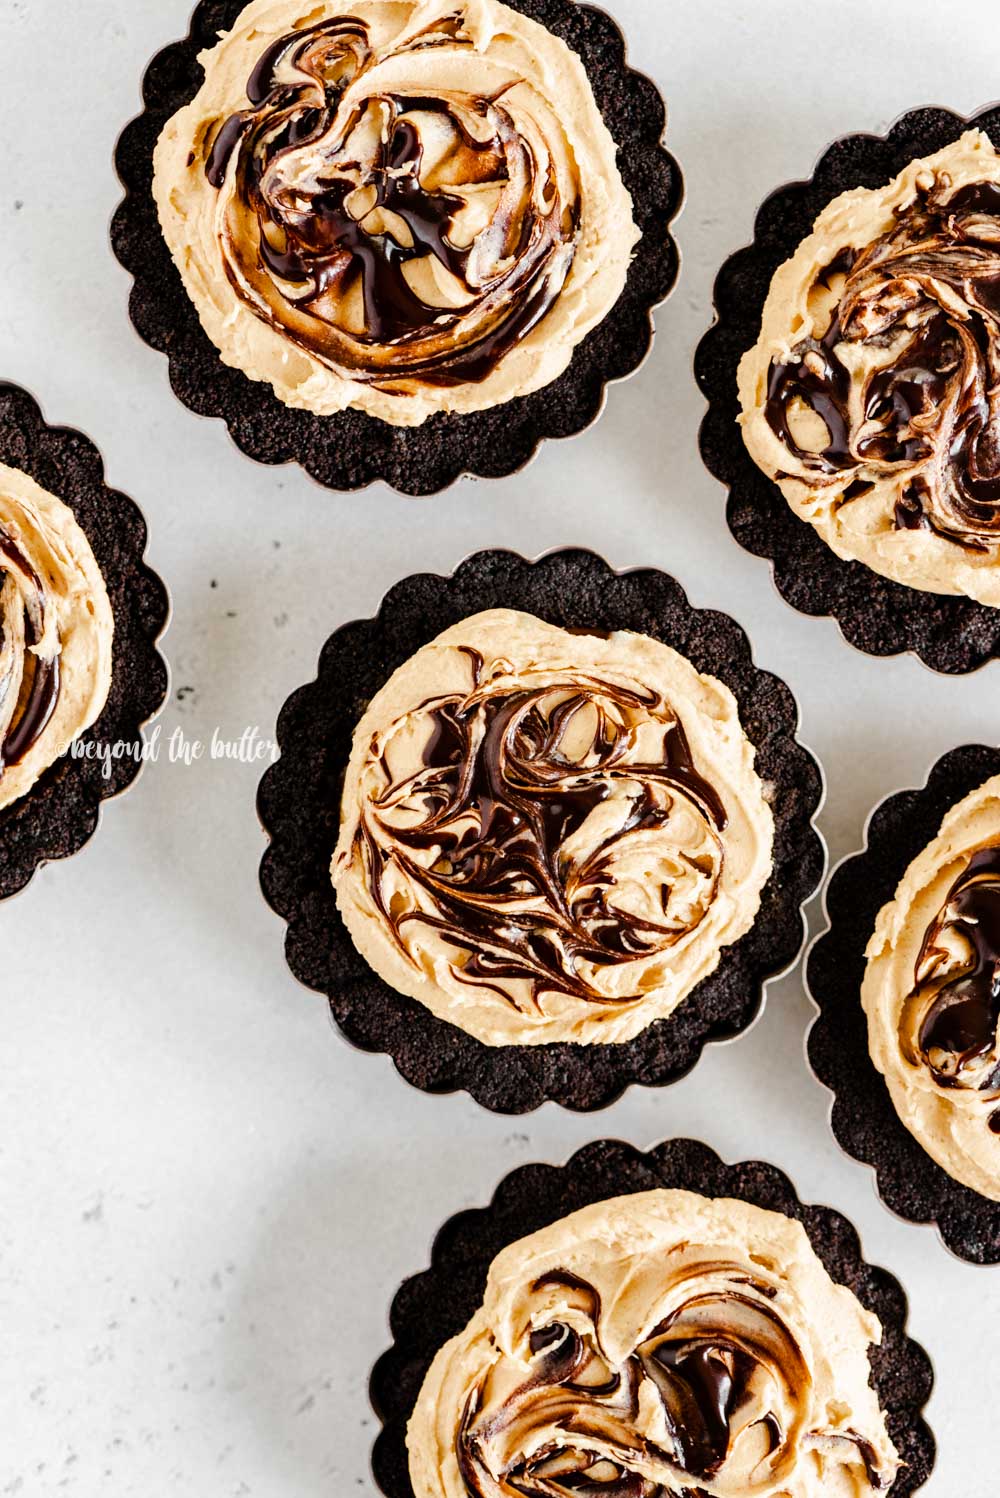 Overhead image of no bake mini chocolate peanut butter swirl tarts | All Images © Beyond the Butter™